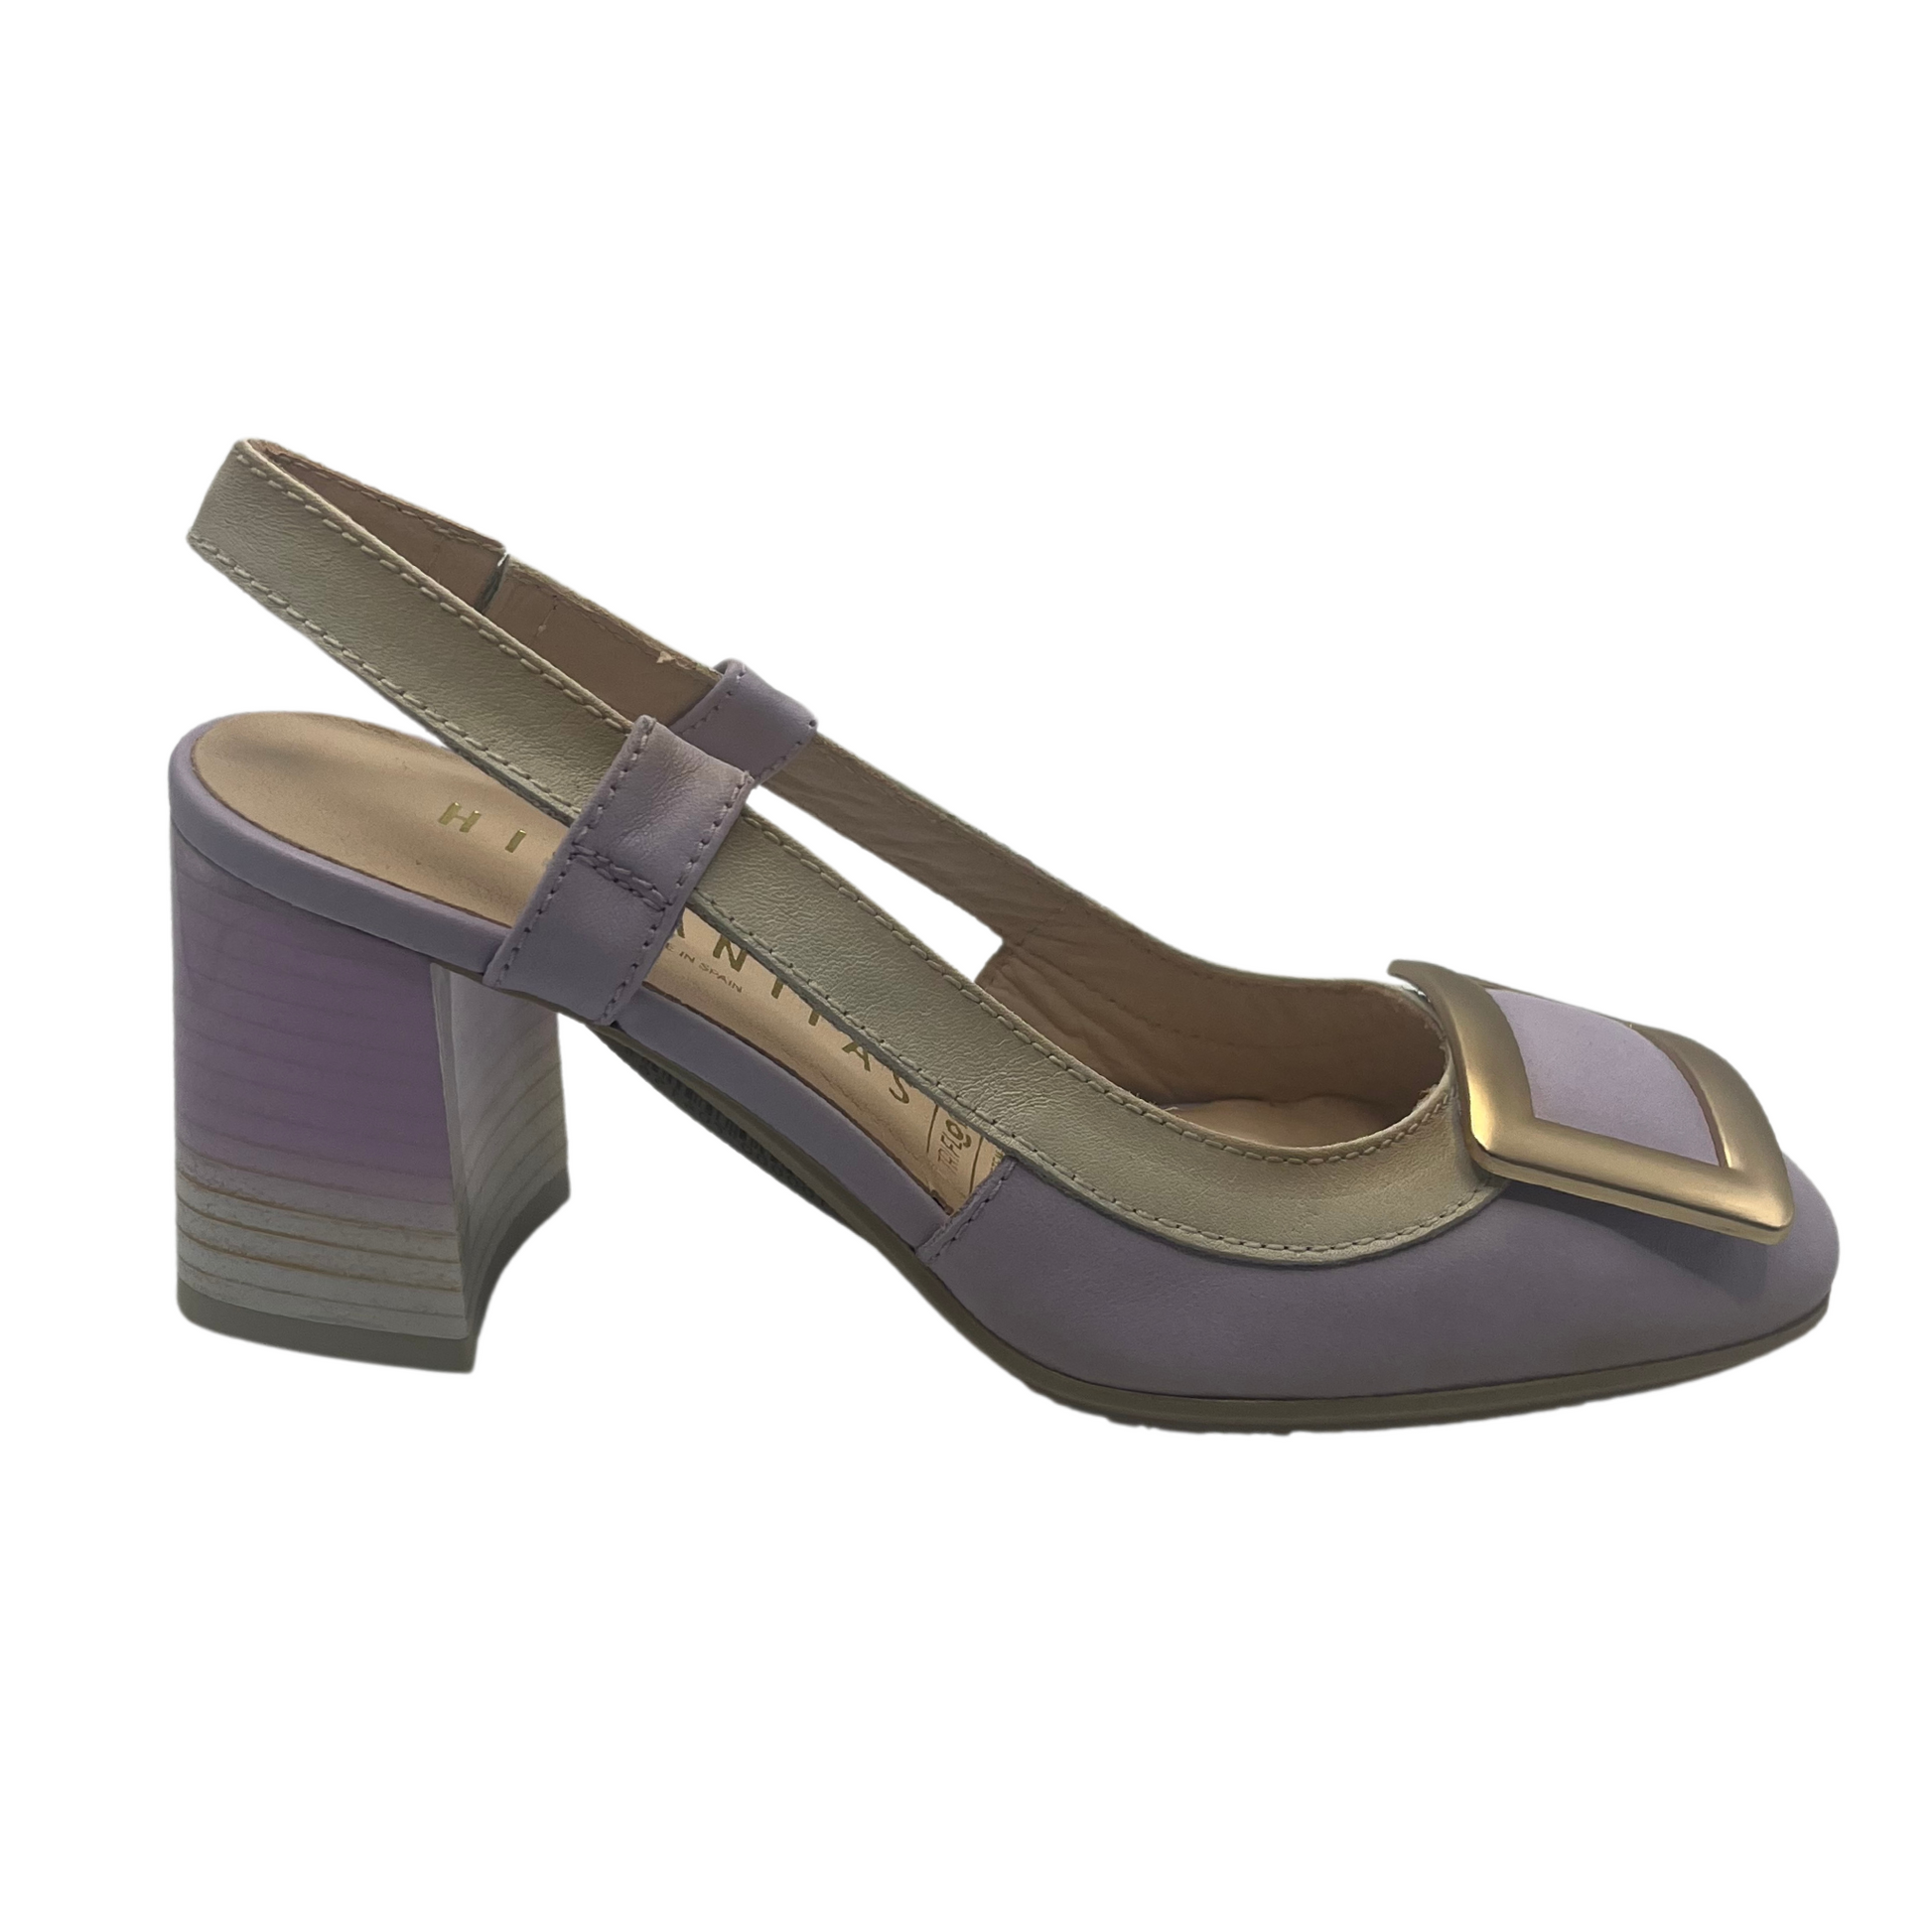 Right facing view of lavender and cream leather pump with 2.75 inch block heel and buckle strap